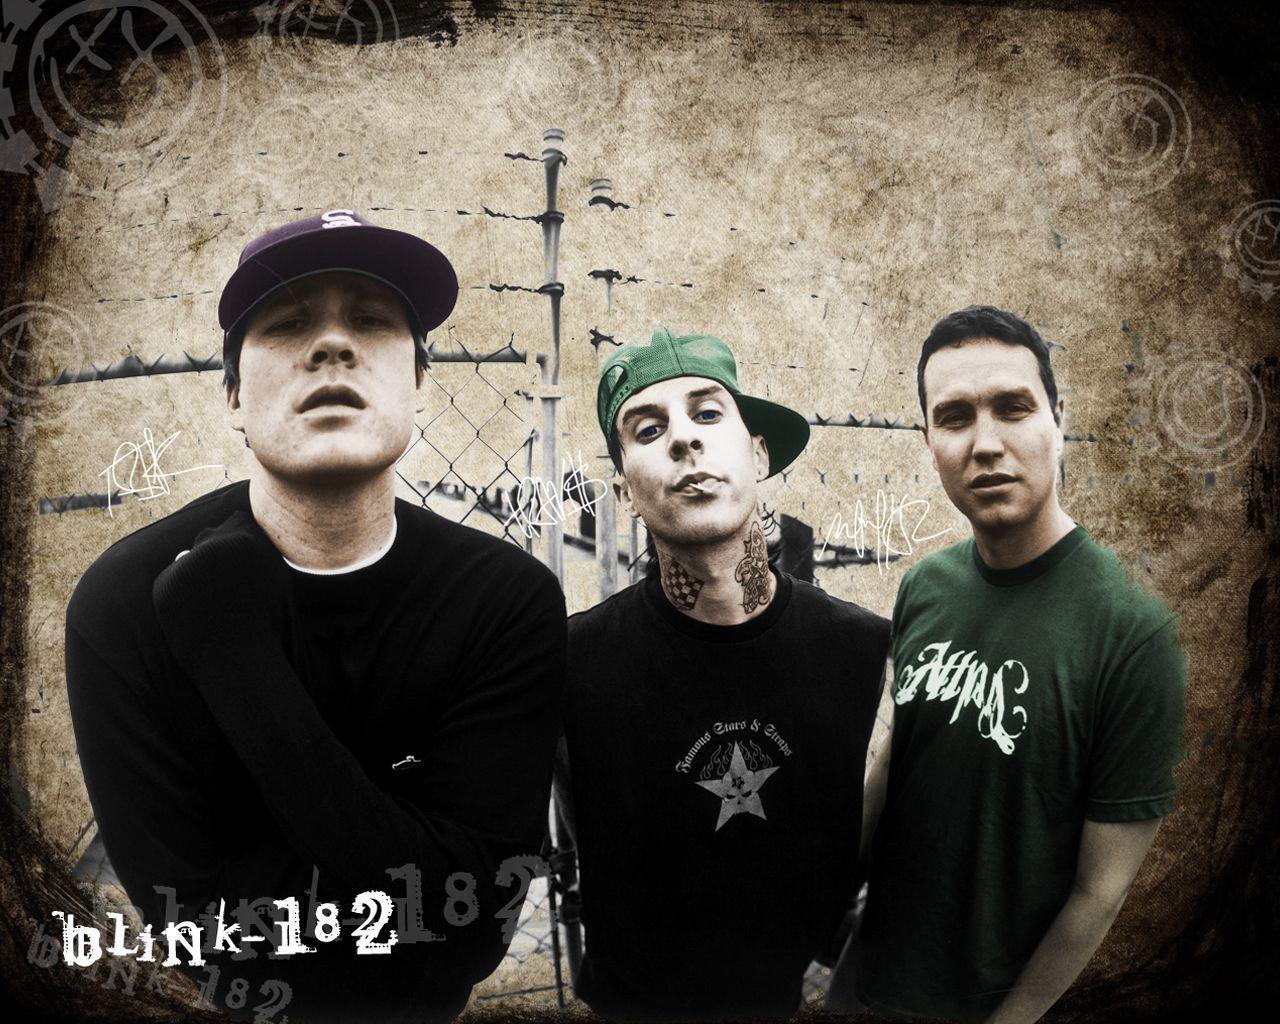 Wallpapers For > Blink 182 Wallpapers 2009